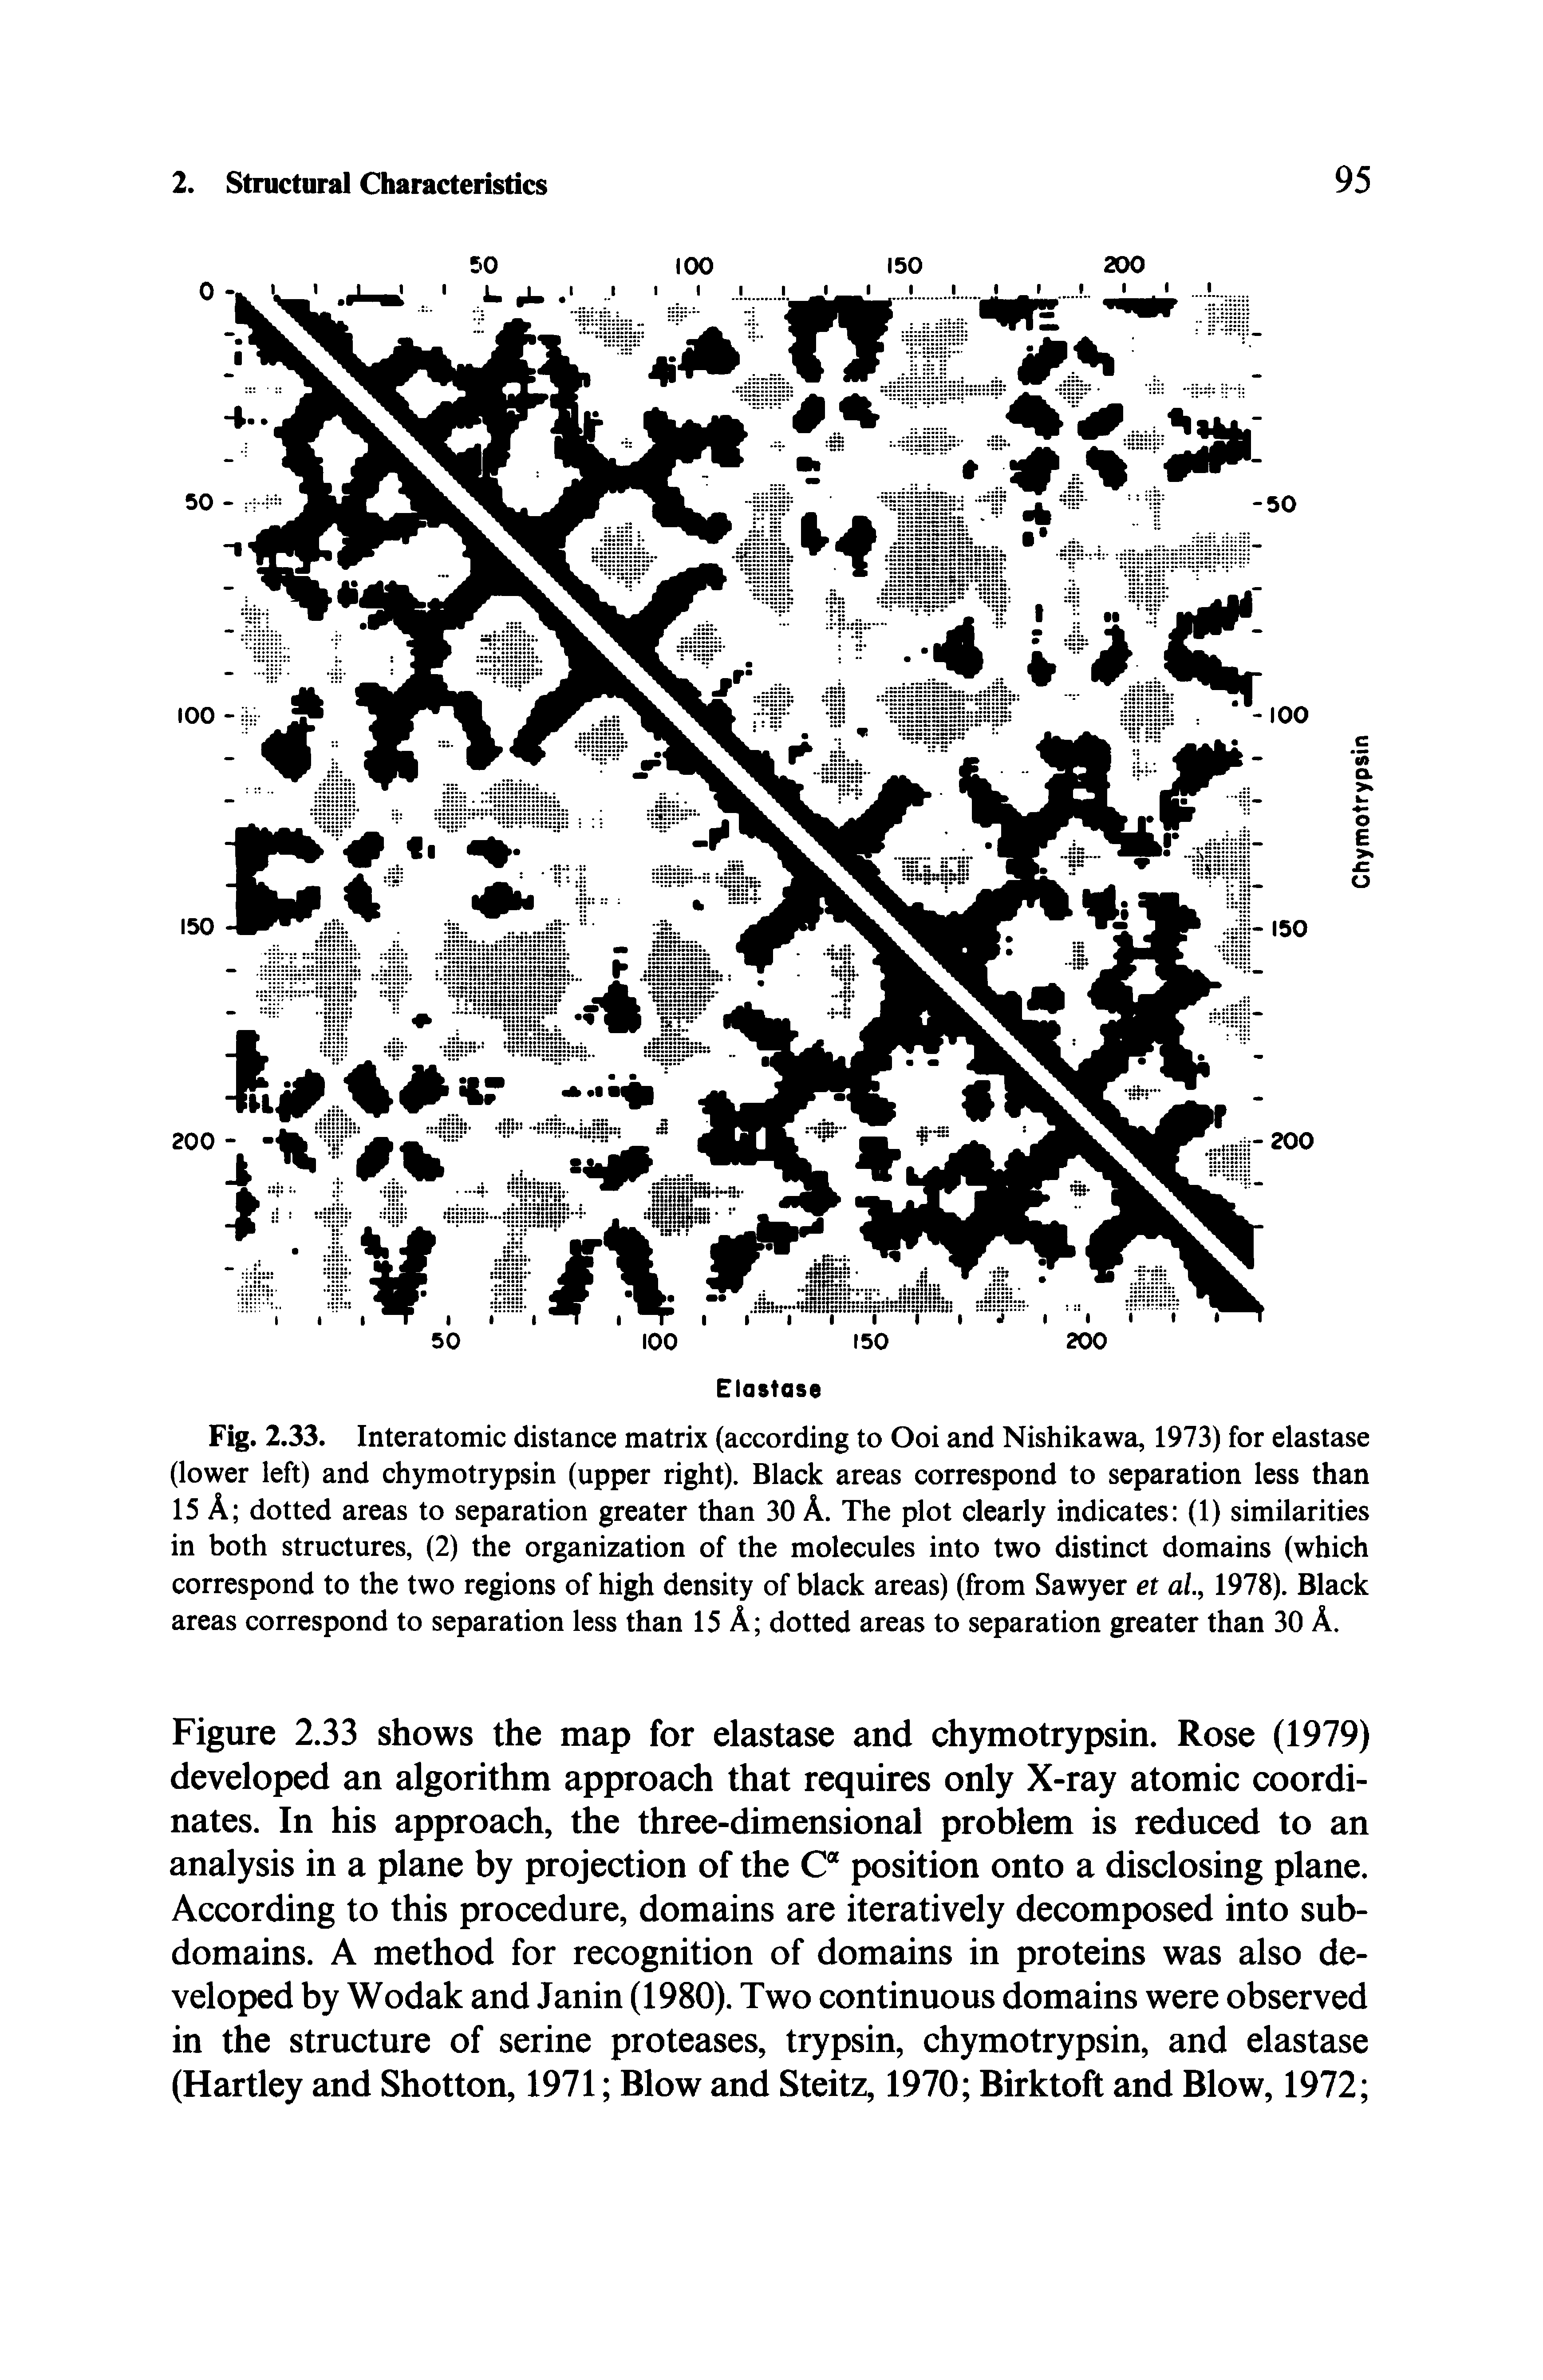 Fig. 2.33. Interatomic distance matrix (according to Ooi and Nishikawa, 1973) for elastase (lower left) and chymotrypsin (upper right). Black areas correspond to separation less than 15 A dotted areas to separation greater than 30 A. The plot clearly indicates (1) similarities in both structures, (2) the organization of the molecules into two distinct domains (which correspond to the two regions of high density of black areas) (from Sawyer et al, 1978). Black areas correspond to separation less than 15 A dotted areas to separation greater than 30 A.